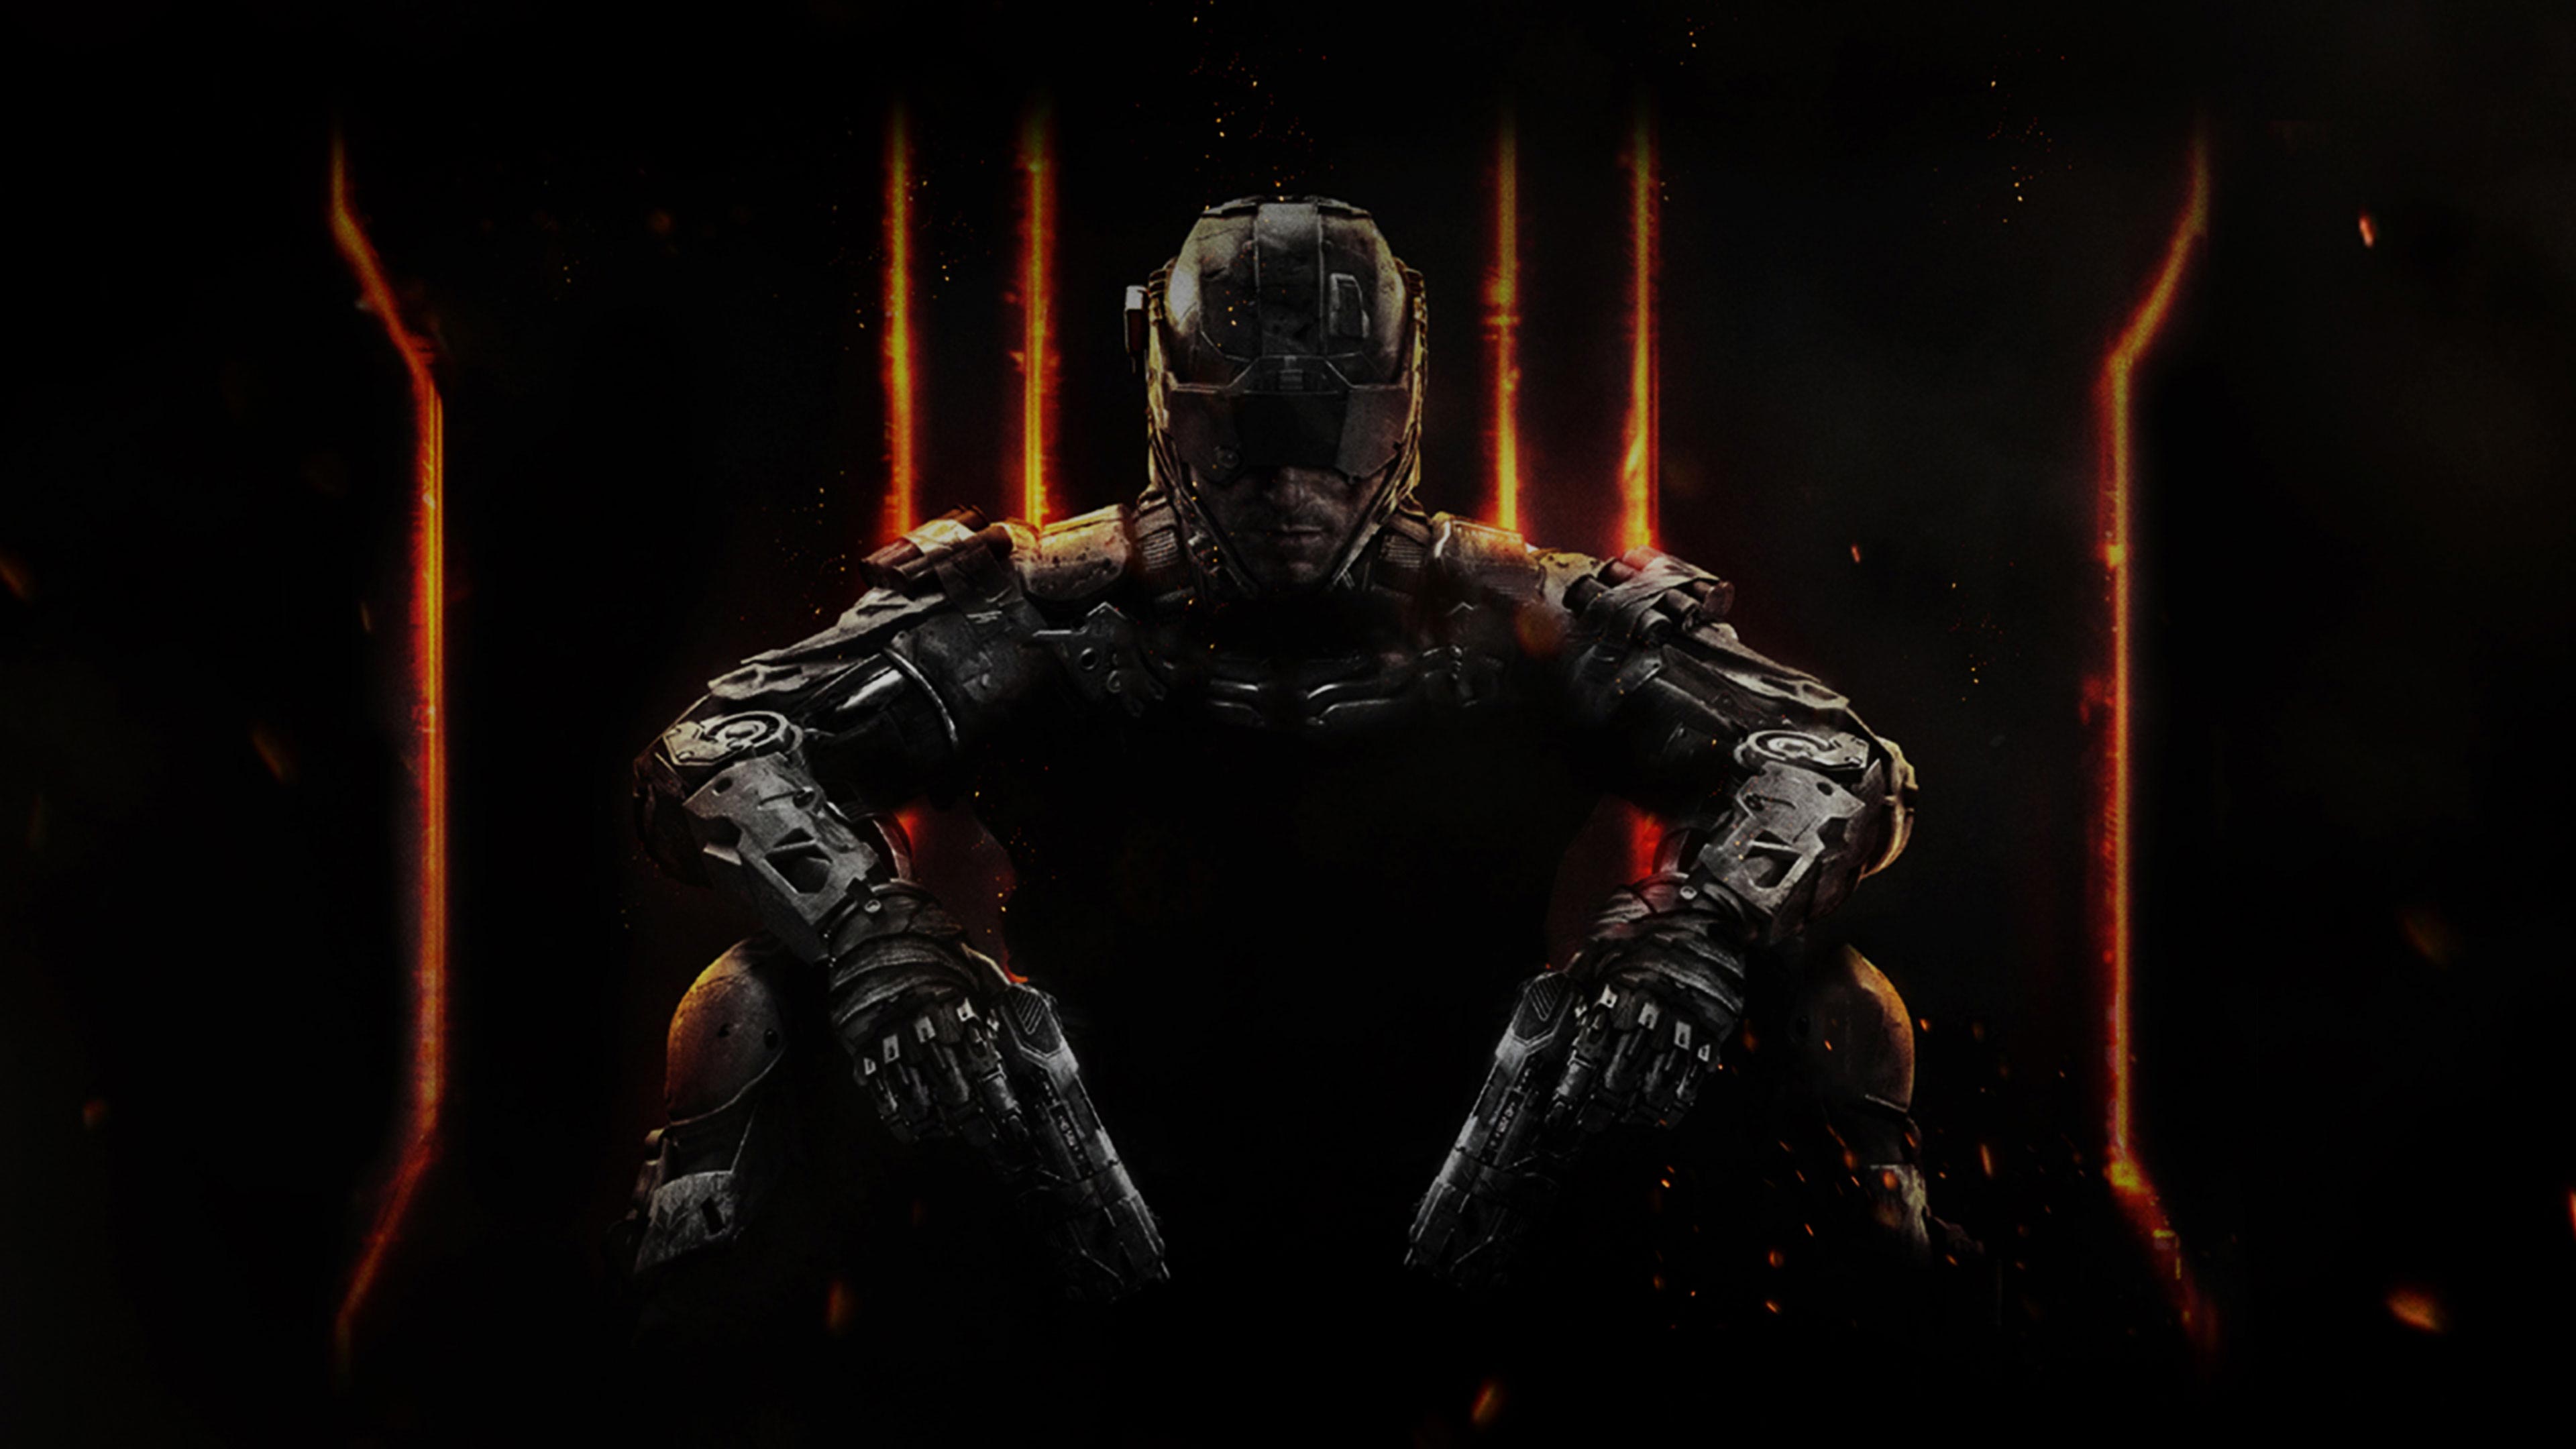 Black Ops 3 Wallpapers Black Ops 3 Forums 3840x2160